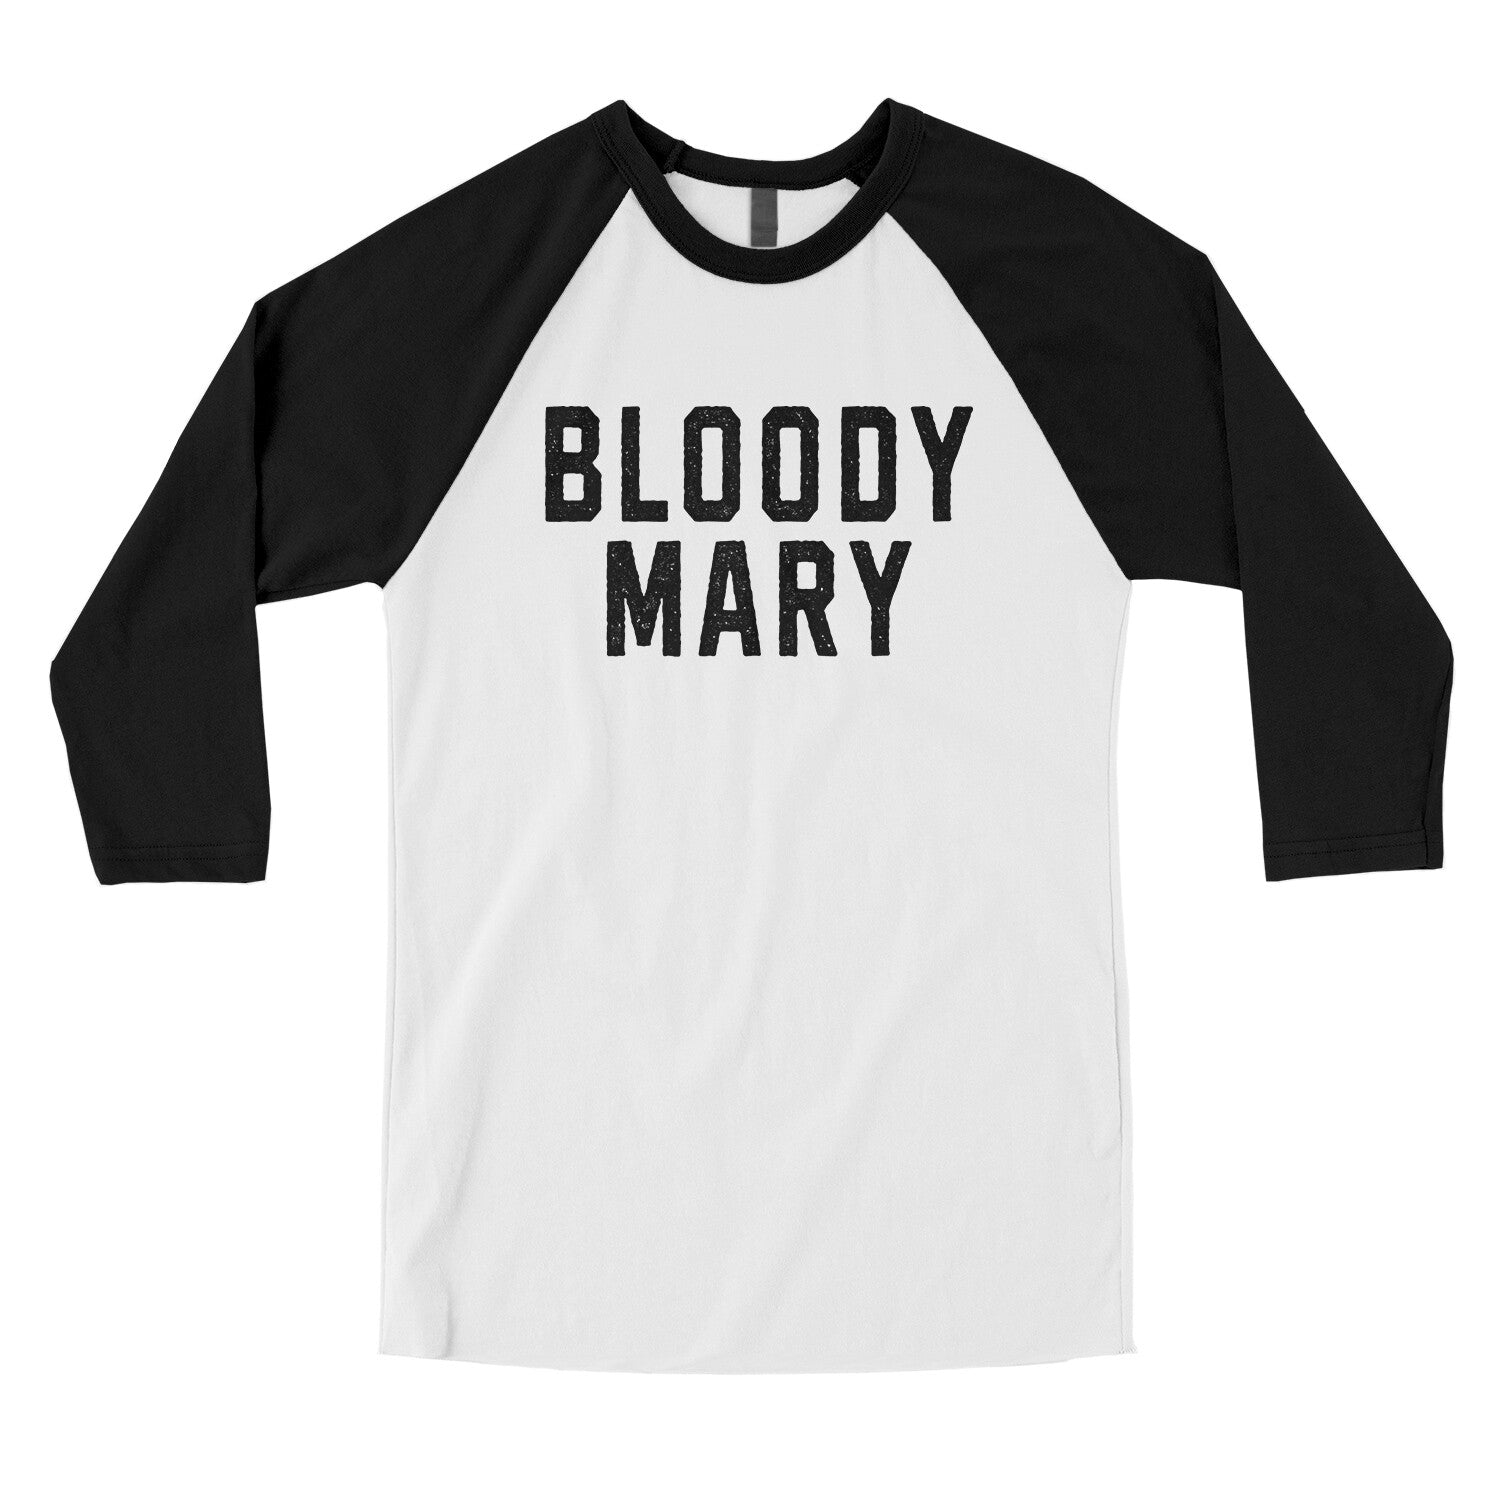 Bloody Mary in White with Black Color